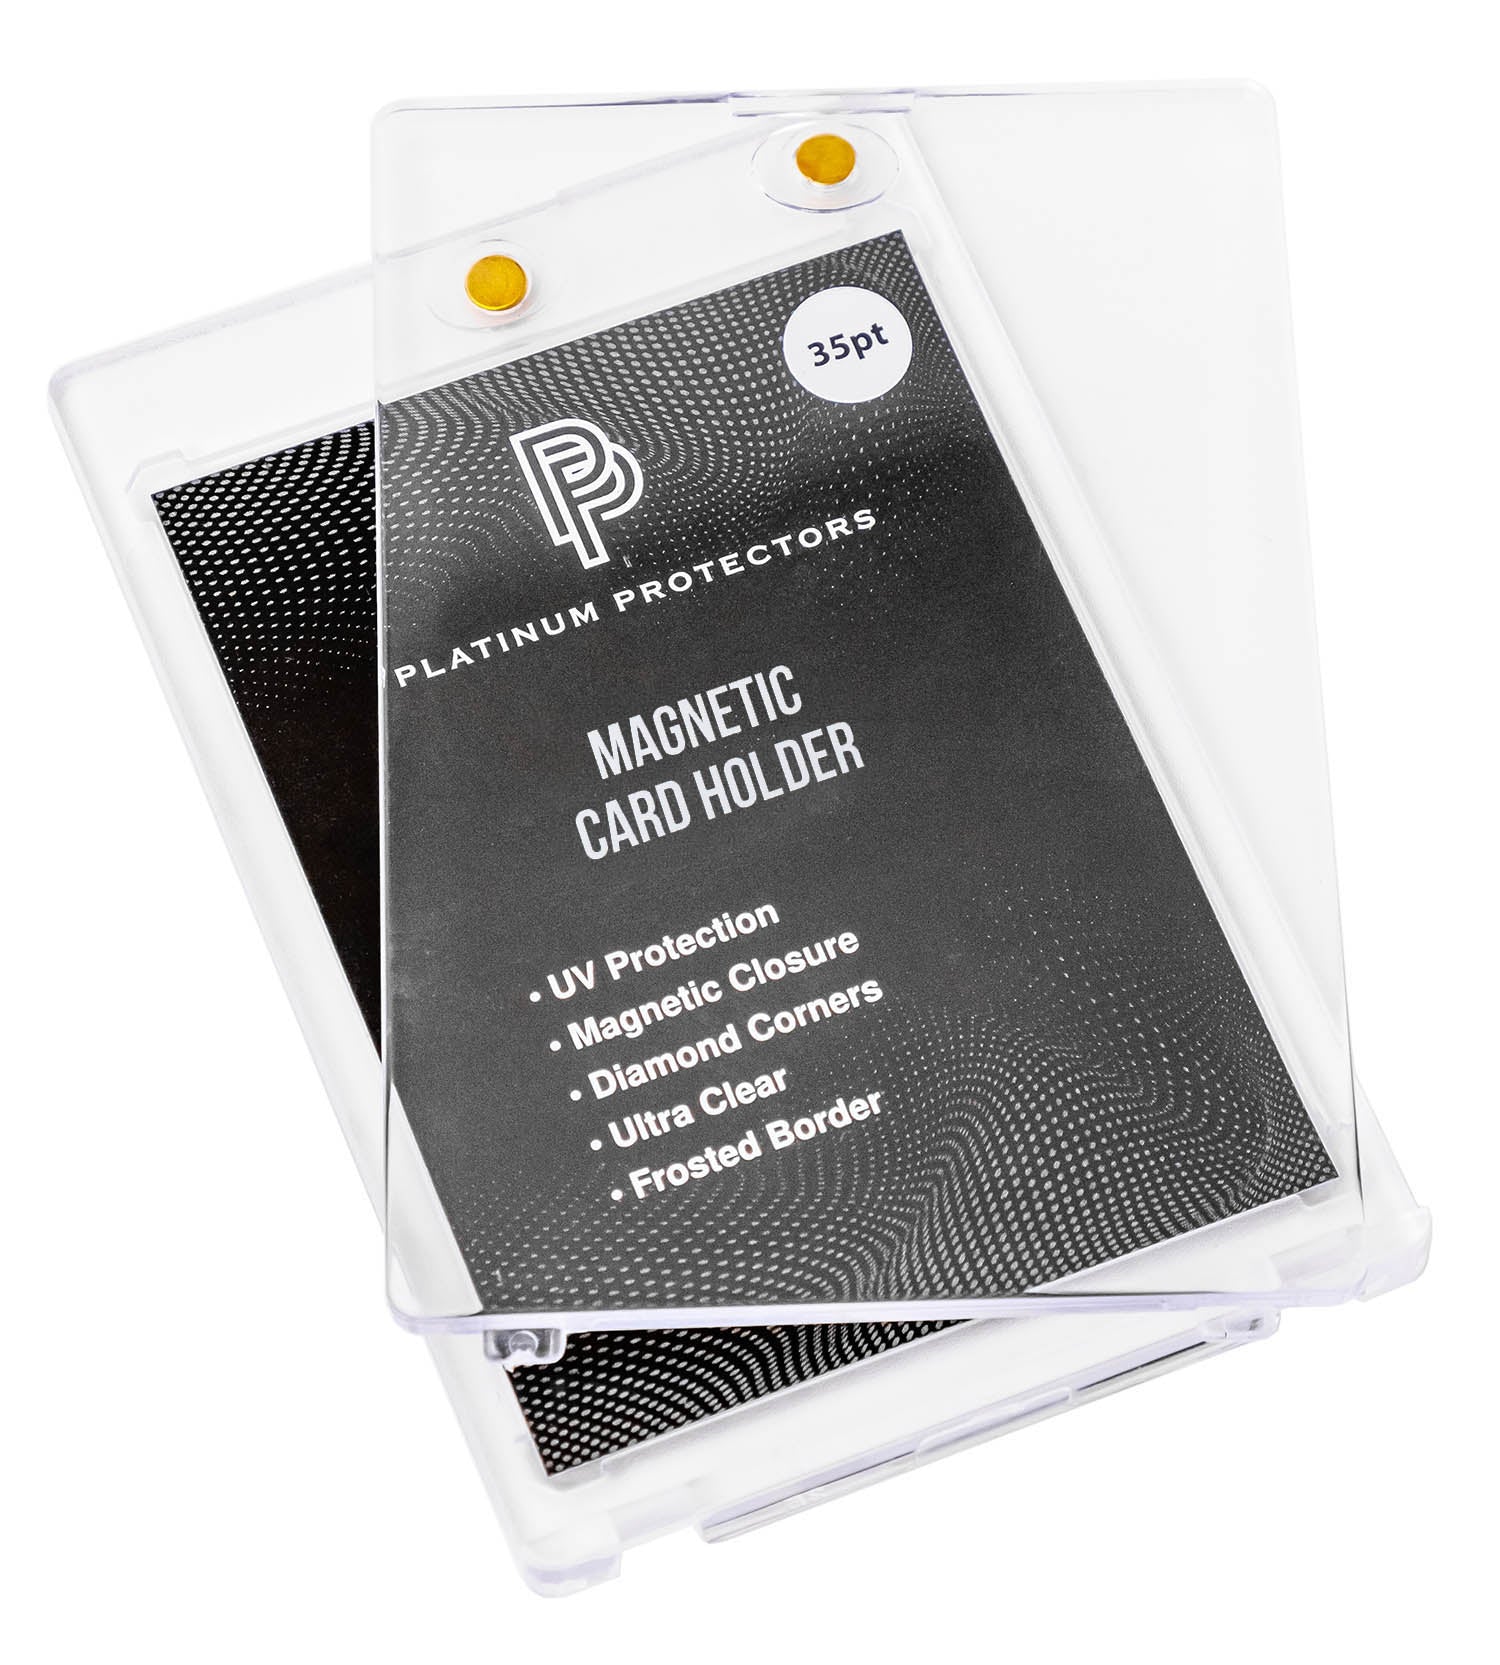 Platinum Protectors Magnetic Card Holders for Trading Cards - 35 pt